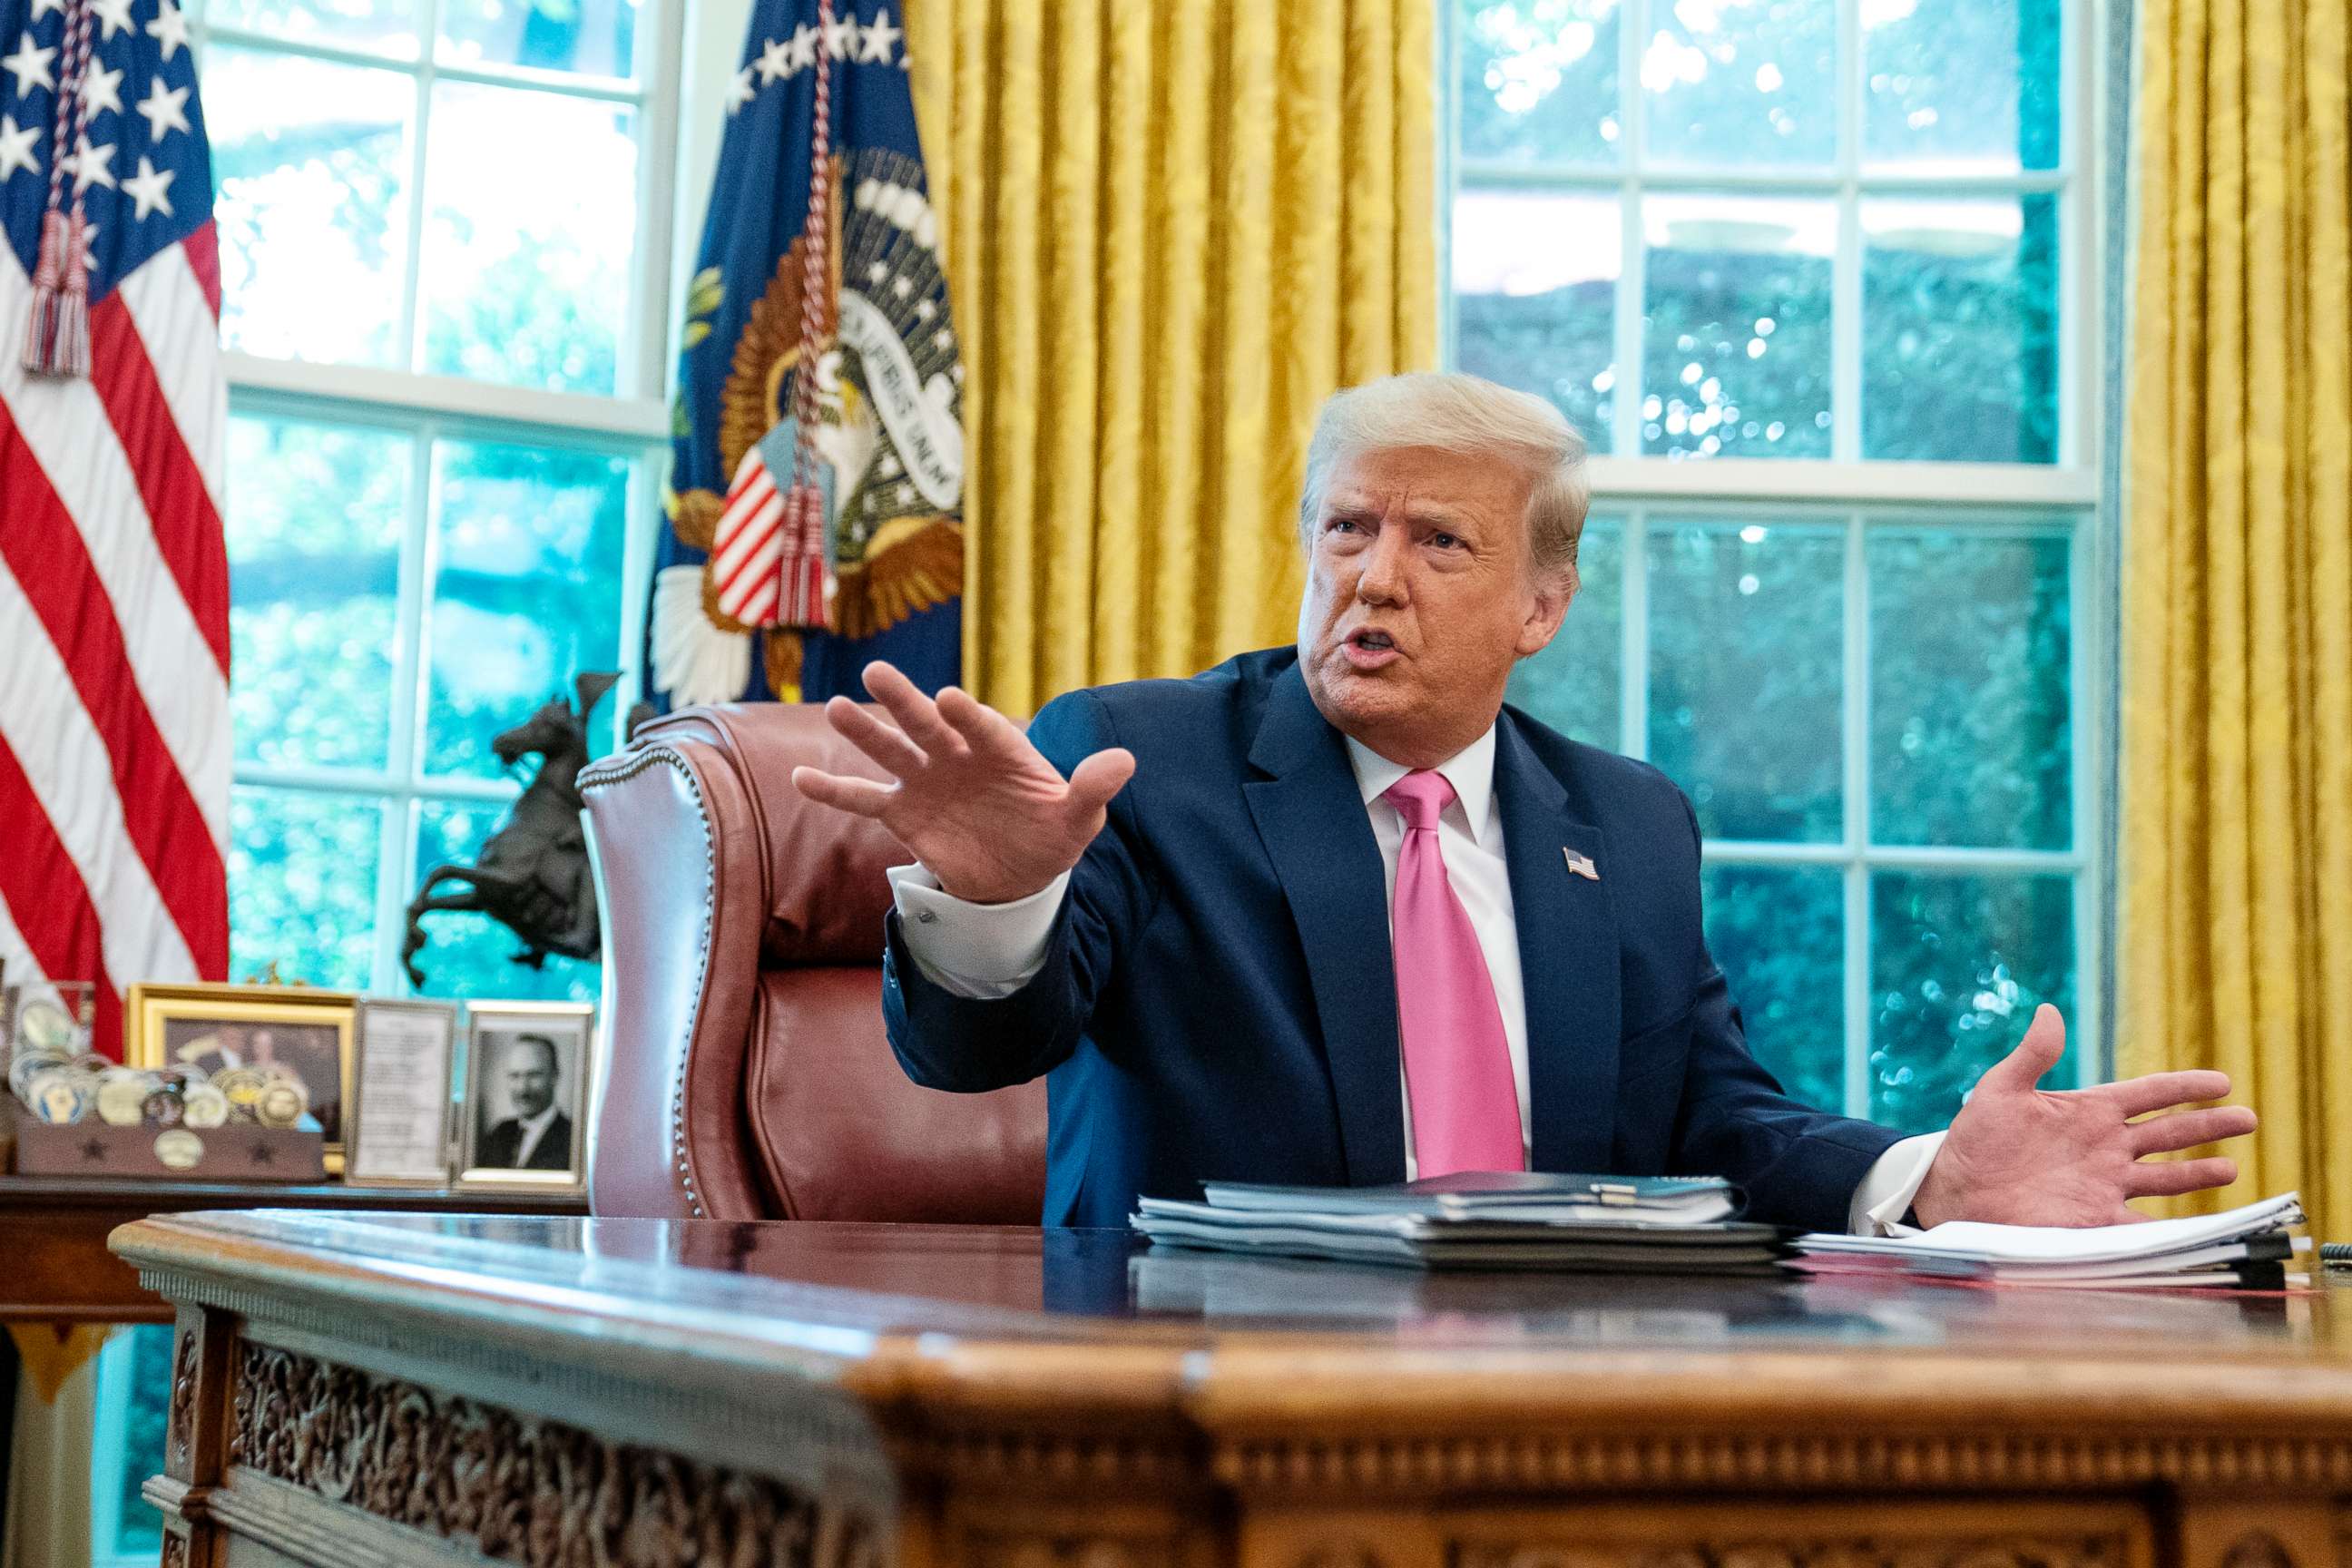 PHOTO: President Donald Trump speaks during a meeting in the Oval Office of the White House, July 20, 2020, in Washington.